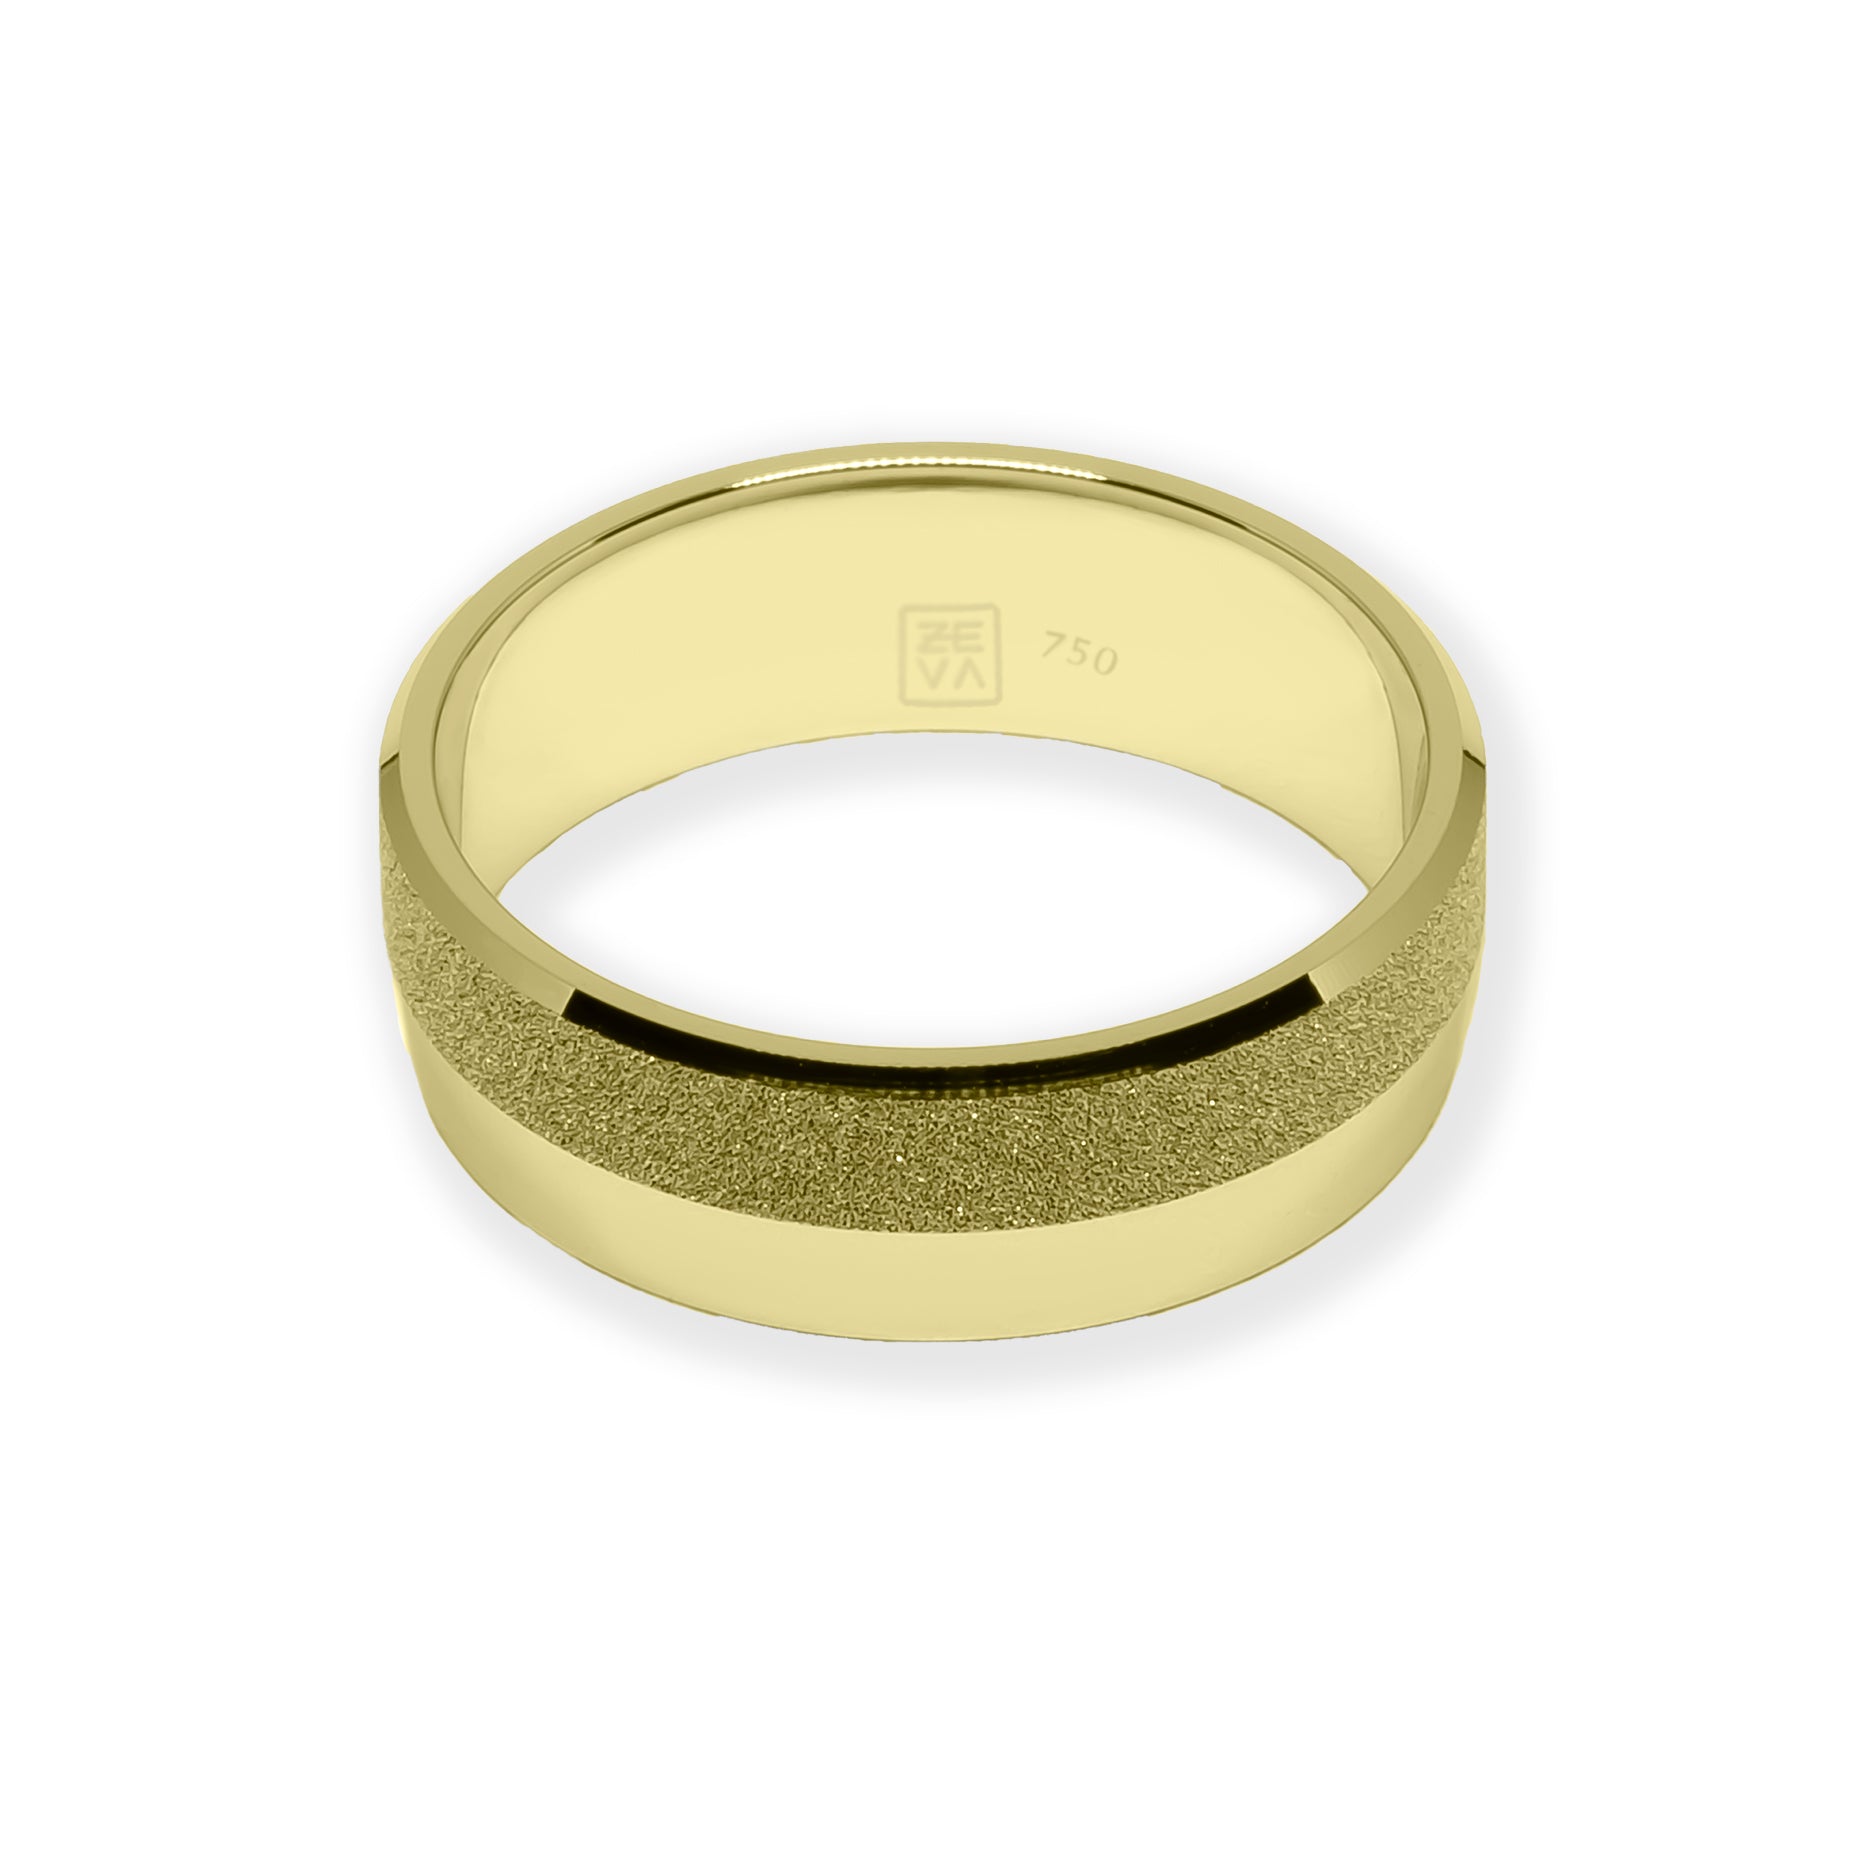 Bague CRUSH 6mm double finition or jaune 18k 750